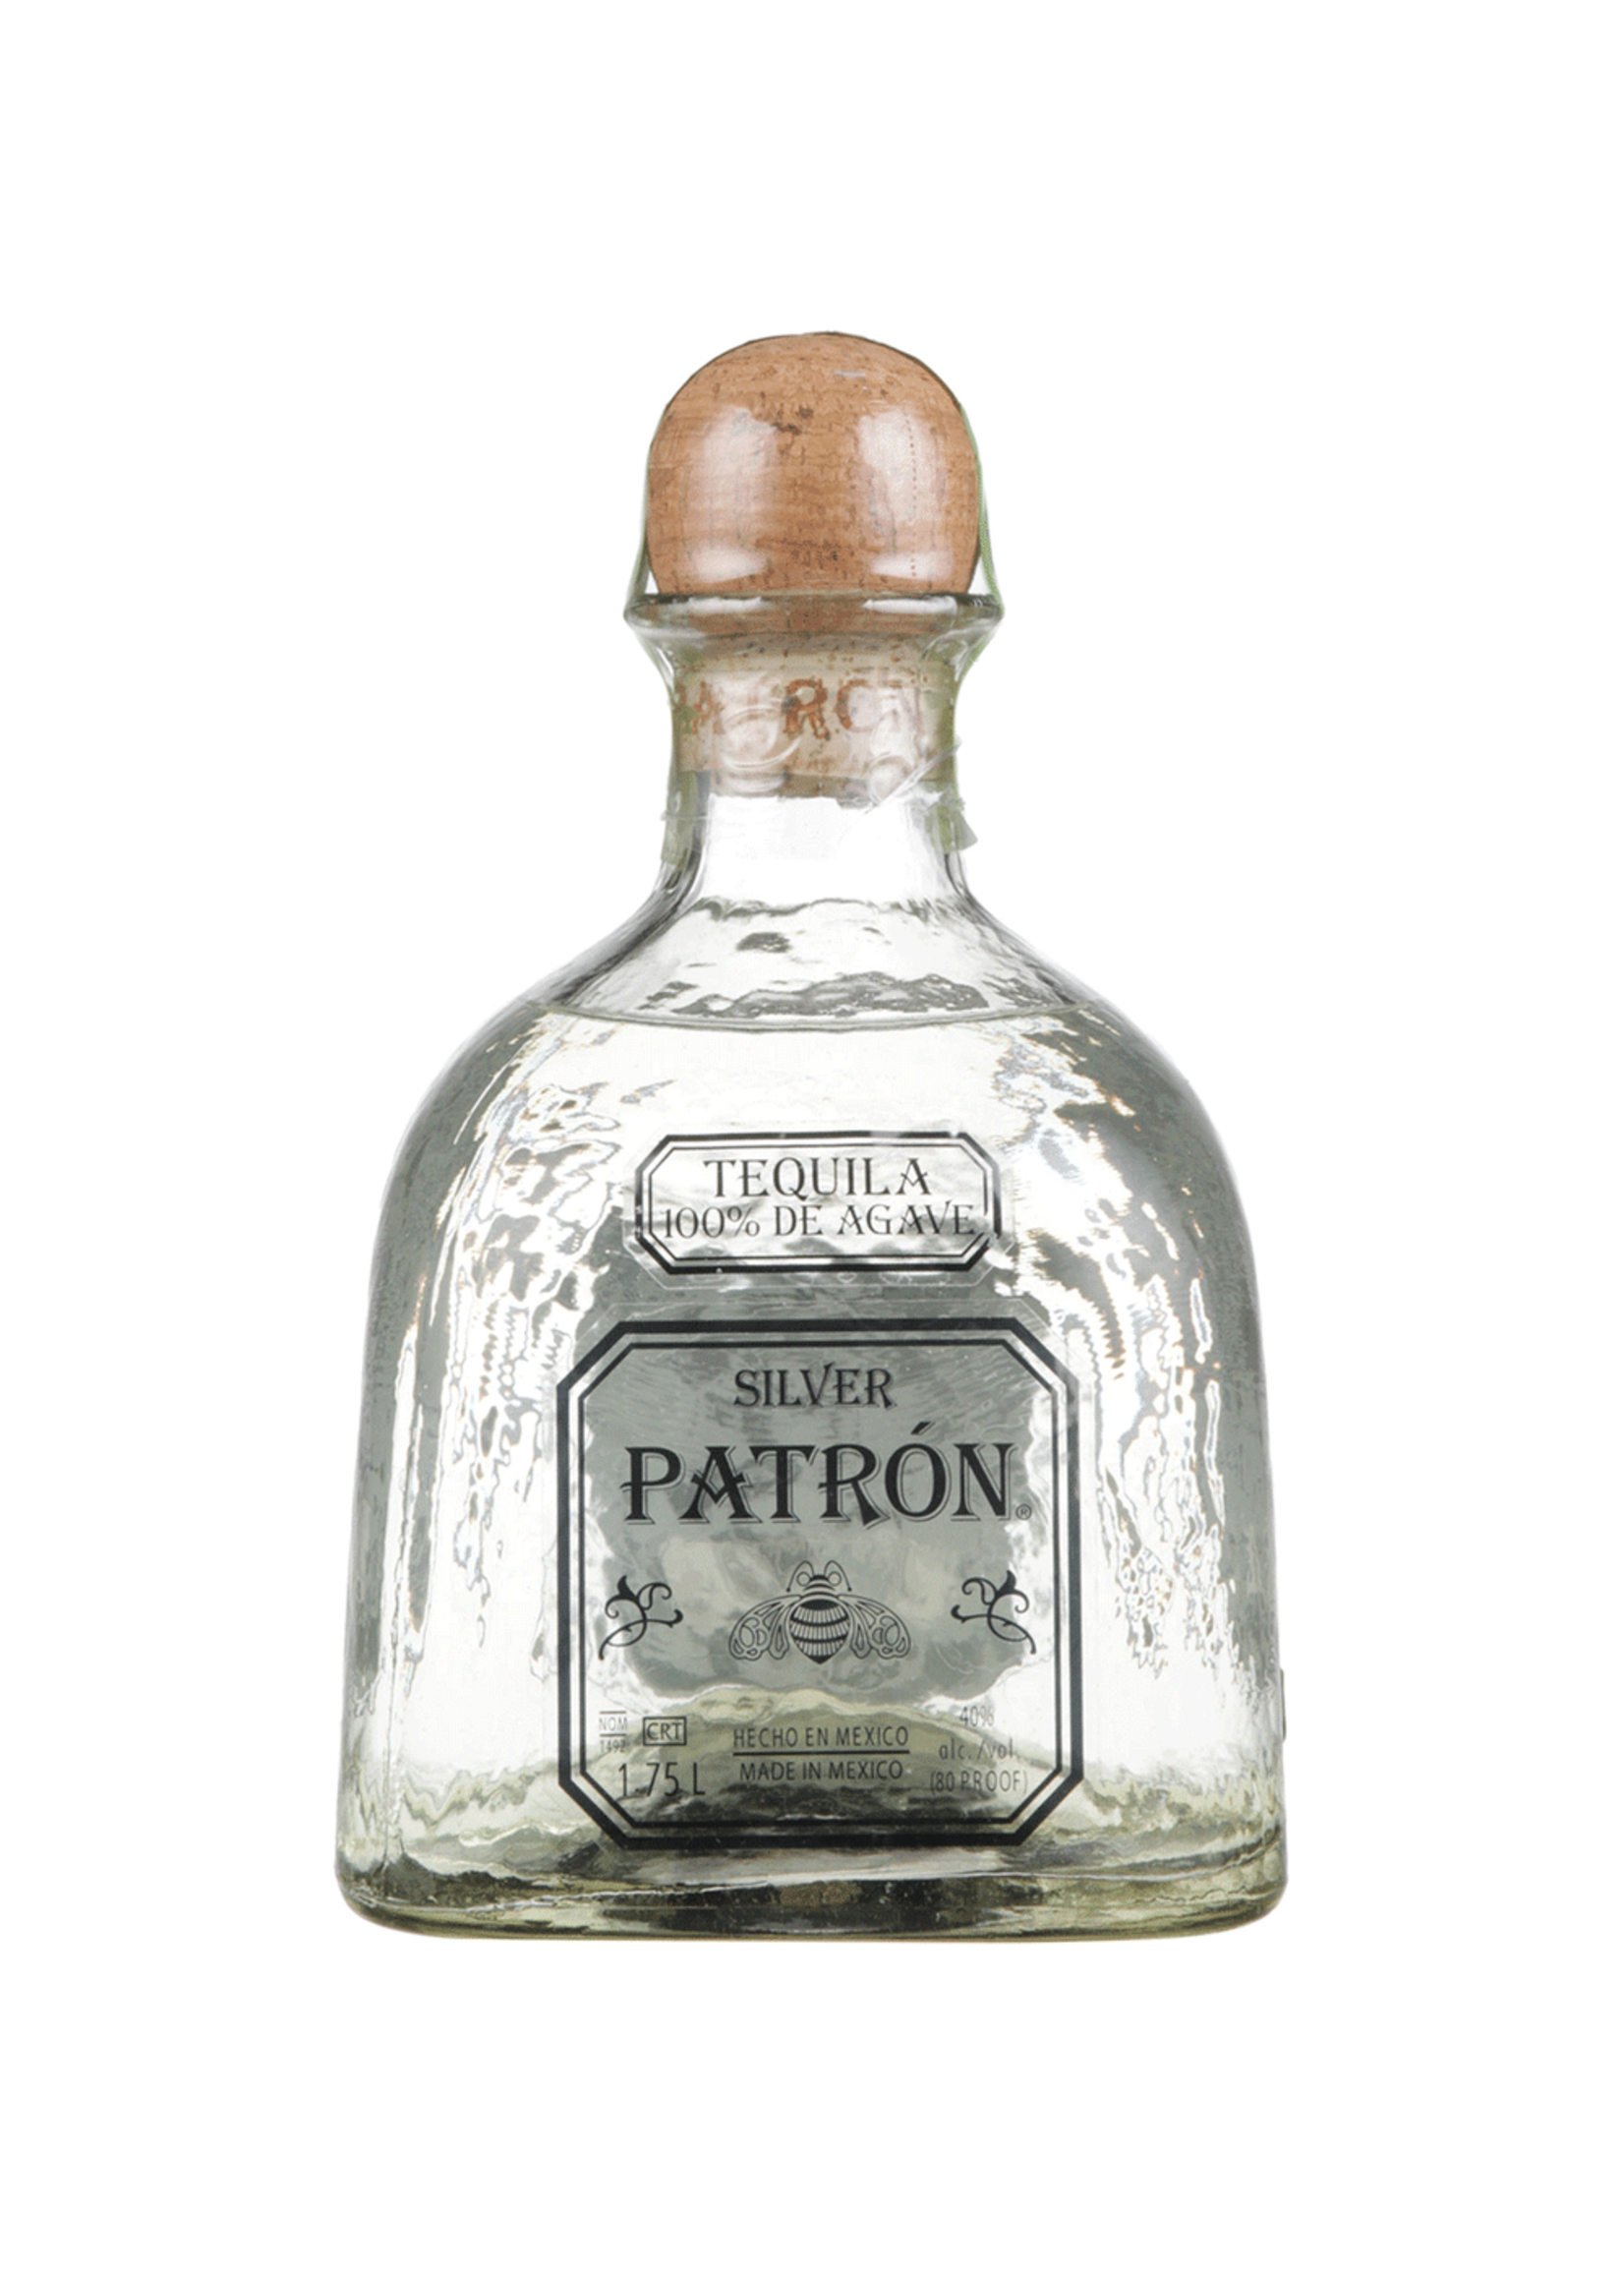 Patron Patron Silver Tequila 80Proof 1.75 Ltr